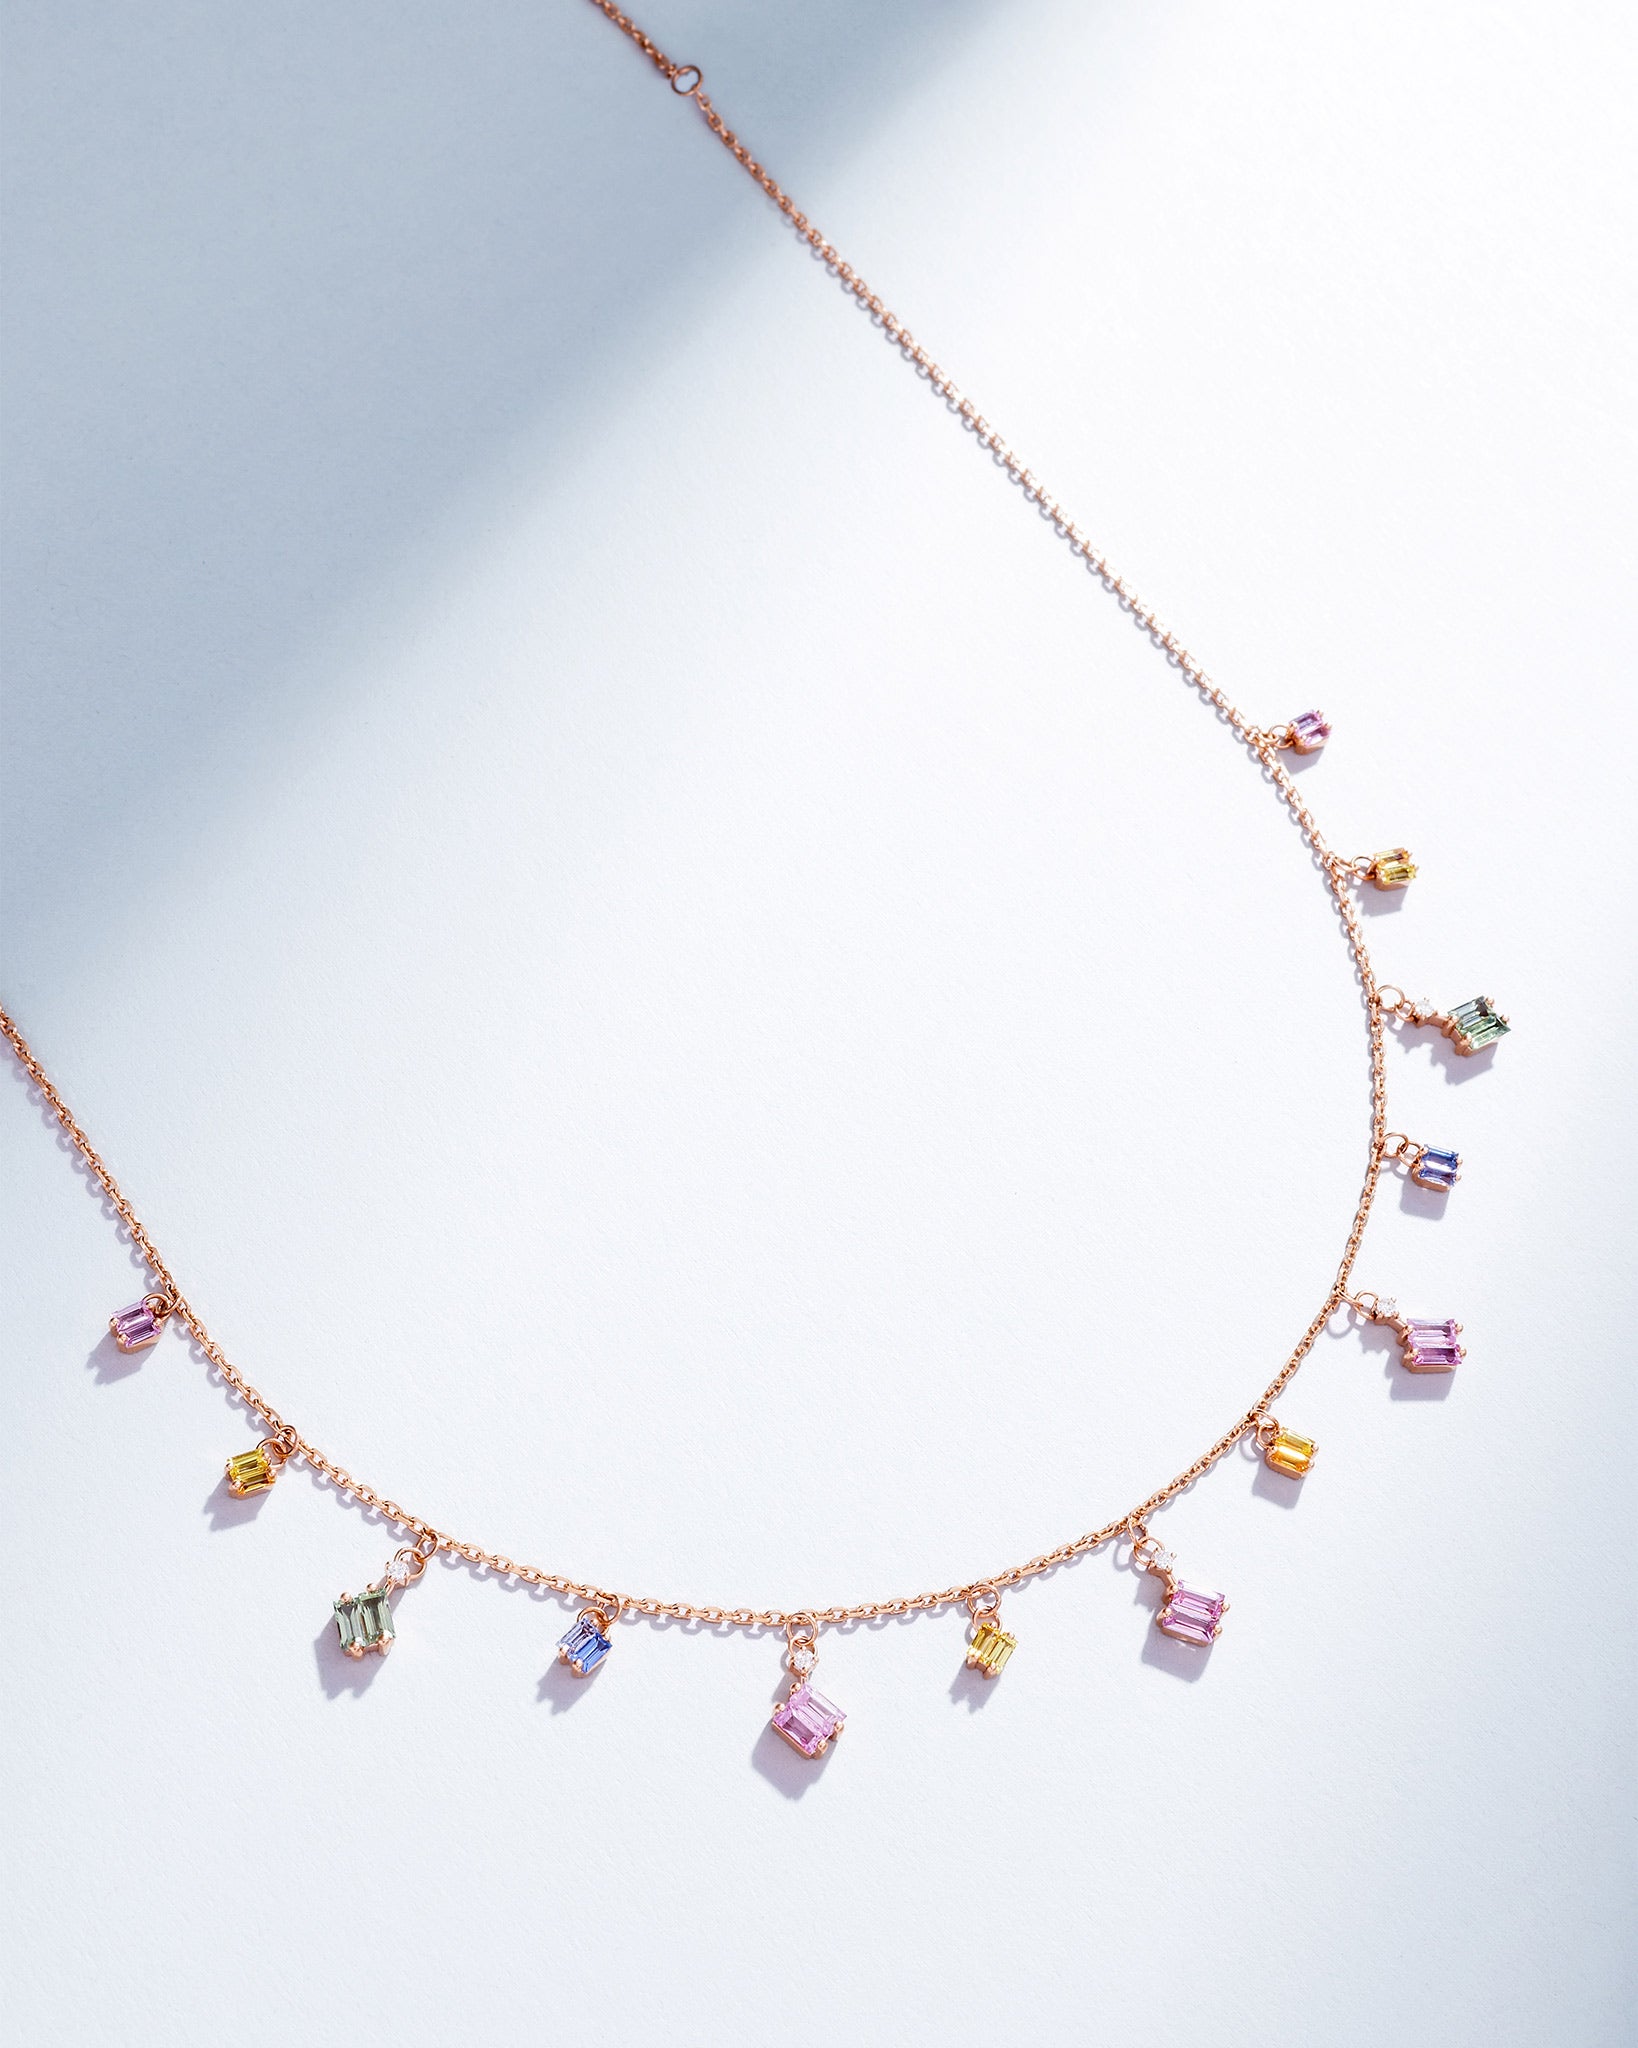 Suzanne Kalan Bold Pastel Sapphire Cascade Necklace in 18k rose gold